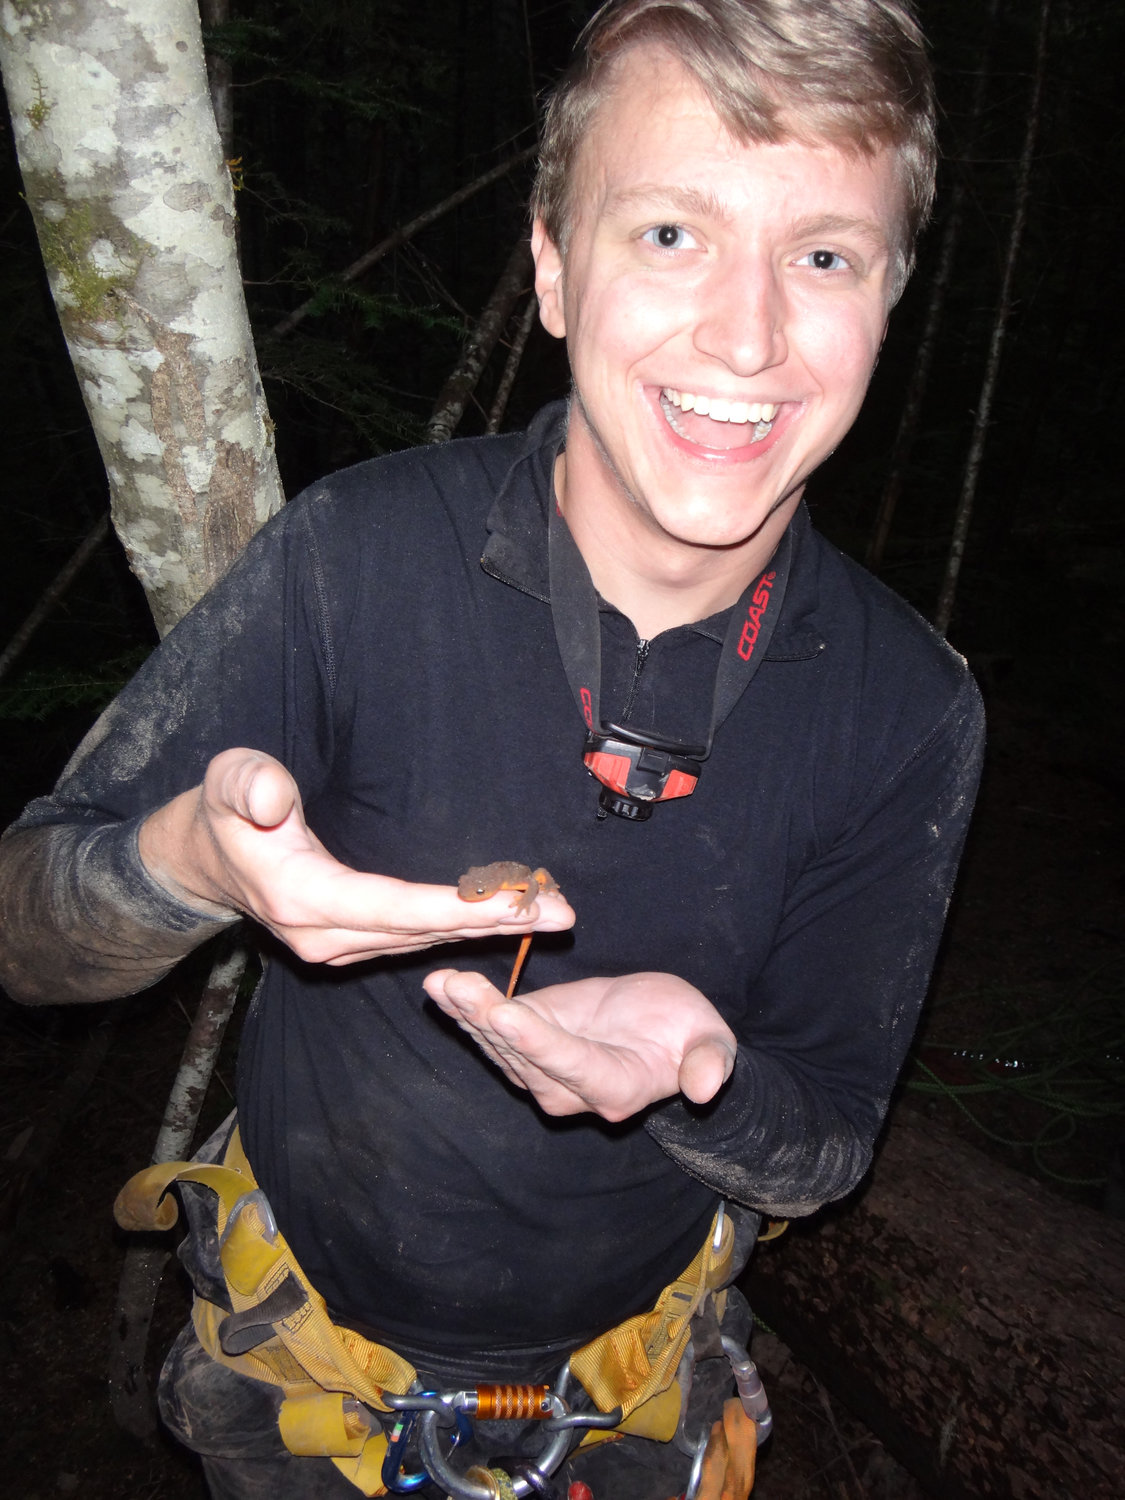 Newts are just one of the fun things you can find in the cave systems. This rough skinned newt is native to the Pacific Northwest and excretes poisonous toxins.